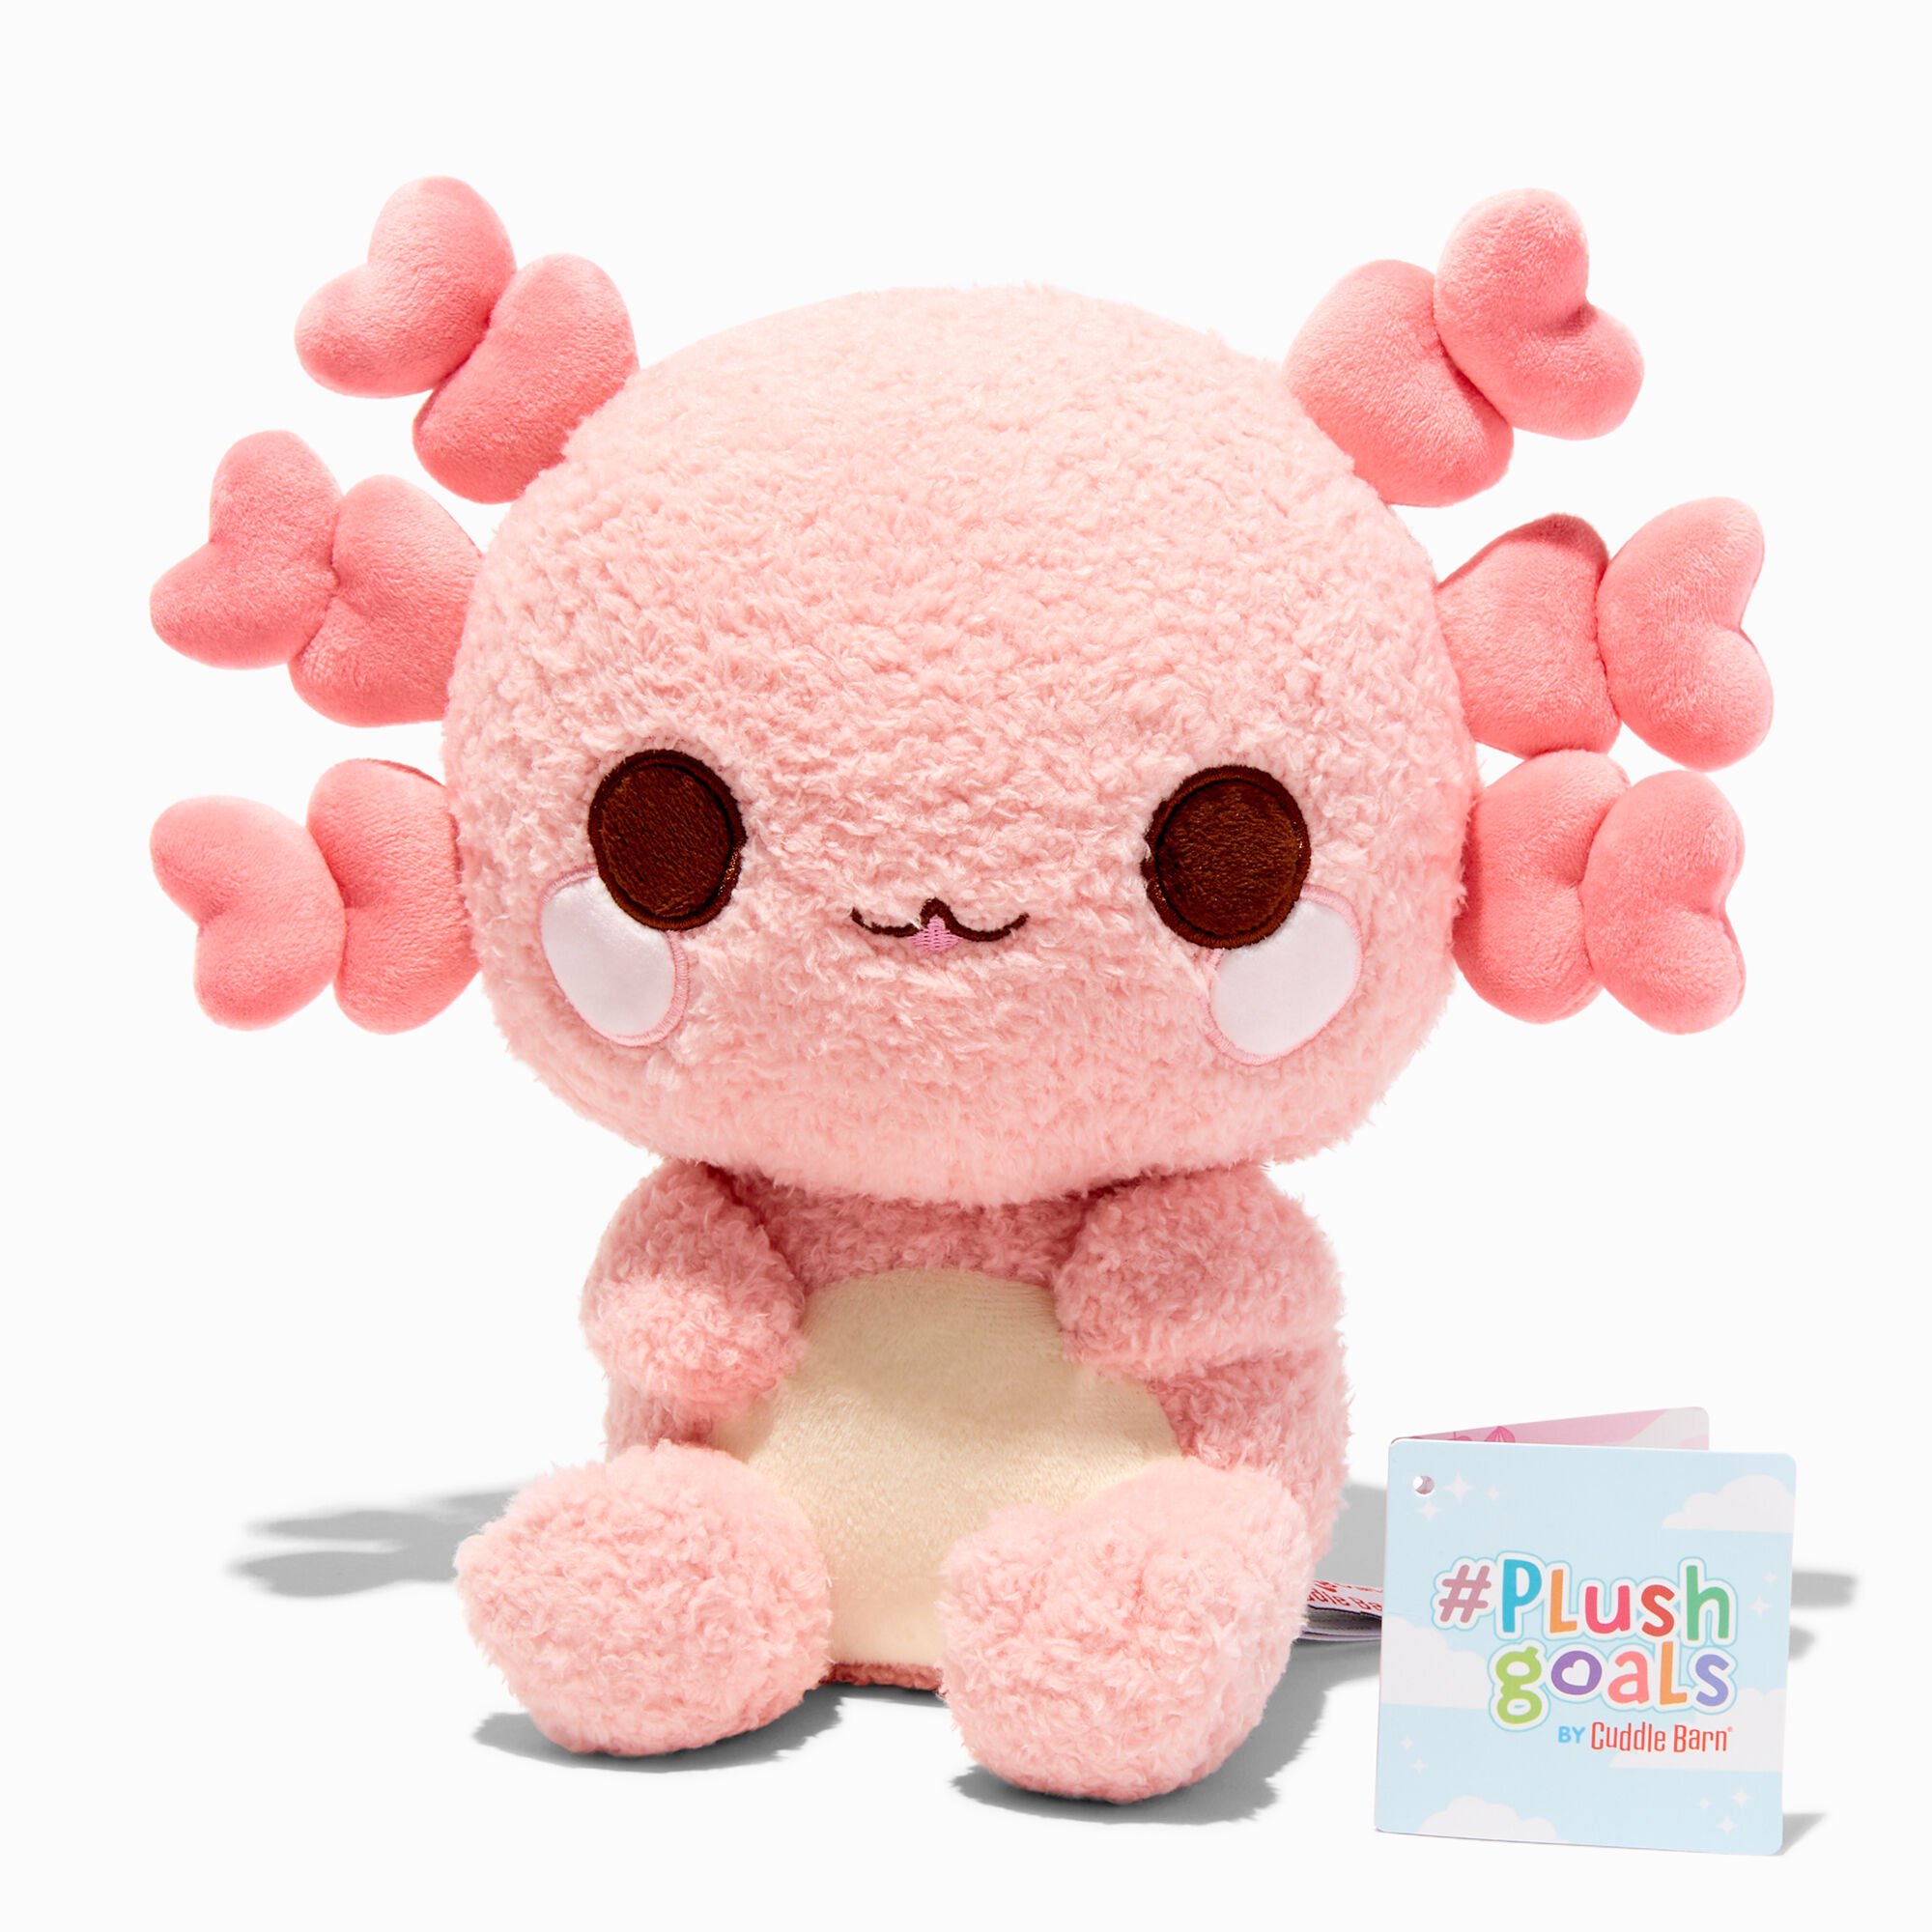 View Claires plush Goals By Cuddle Barn 10 Lottie Axolotl Soft Toy information